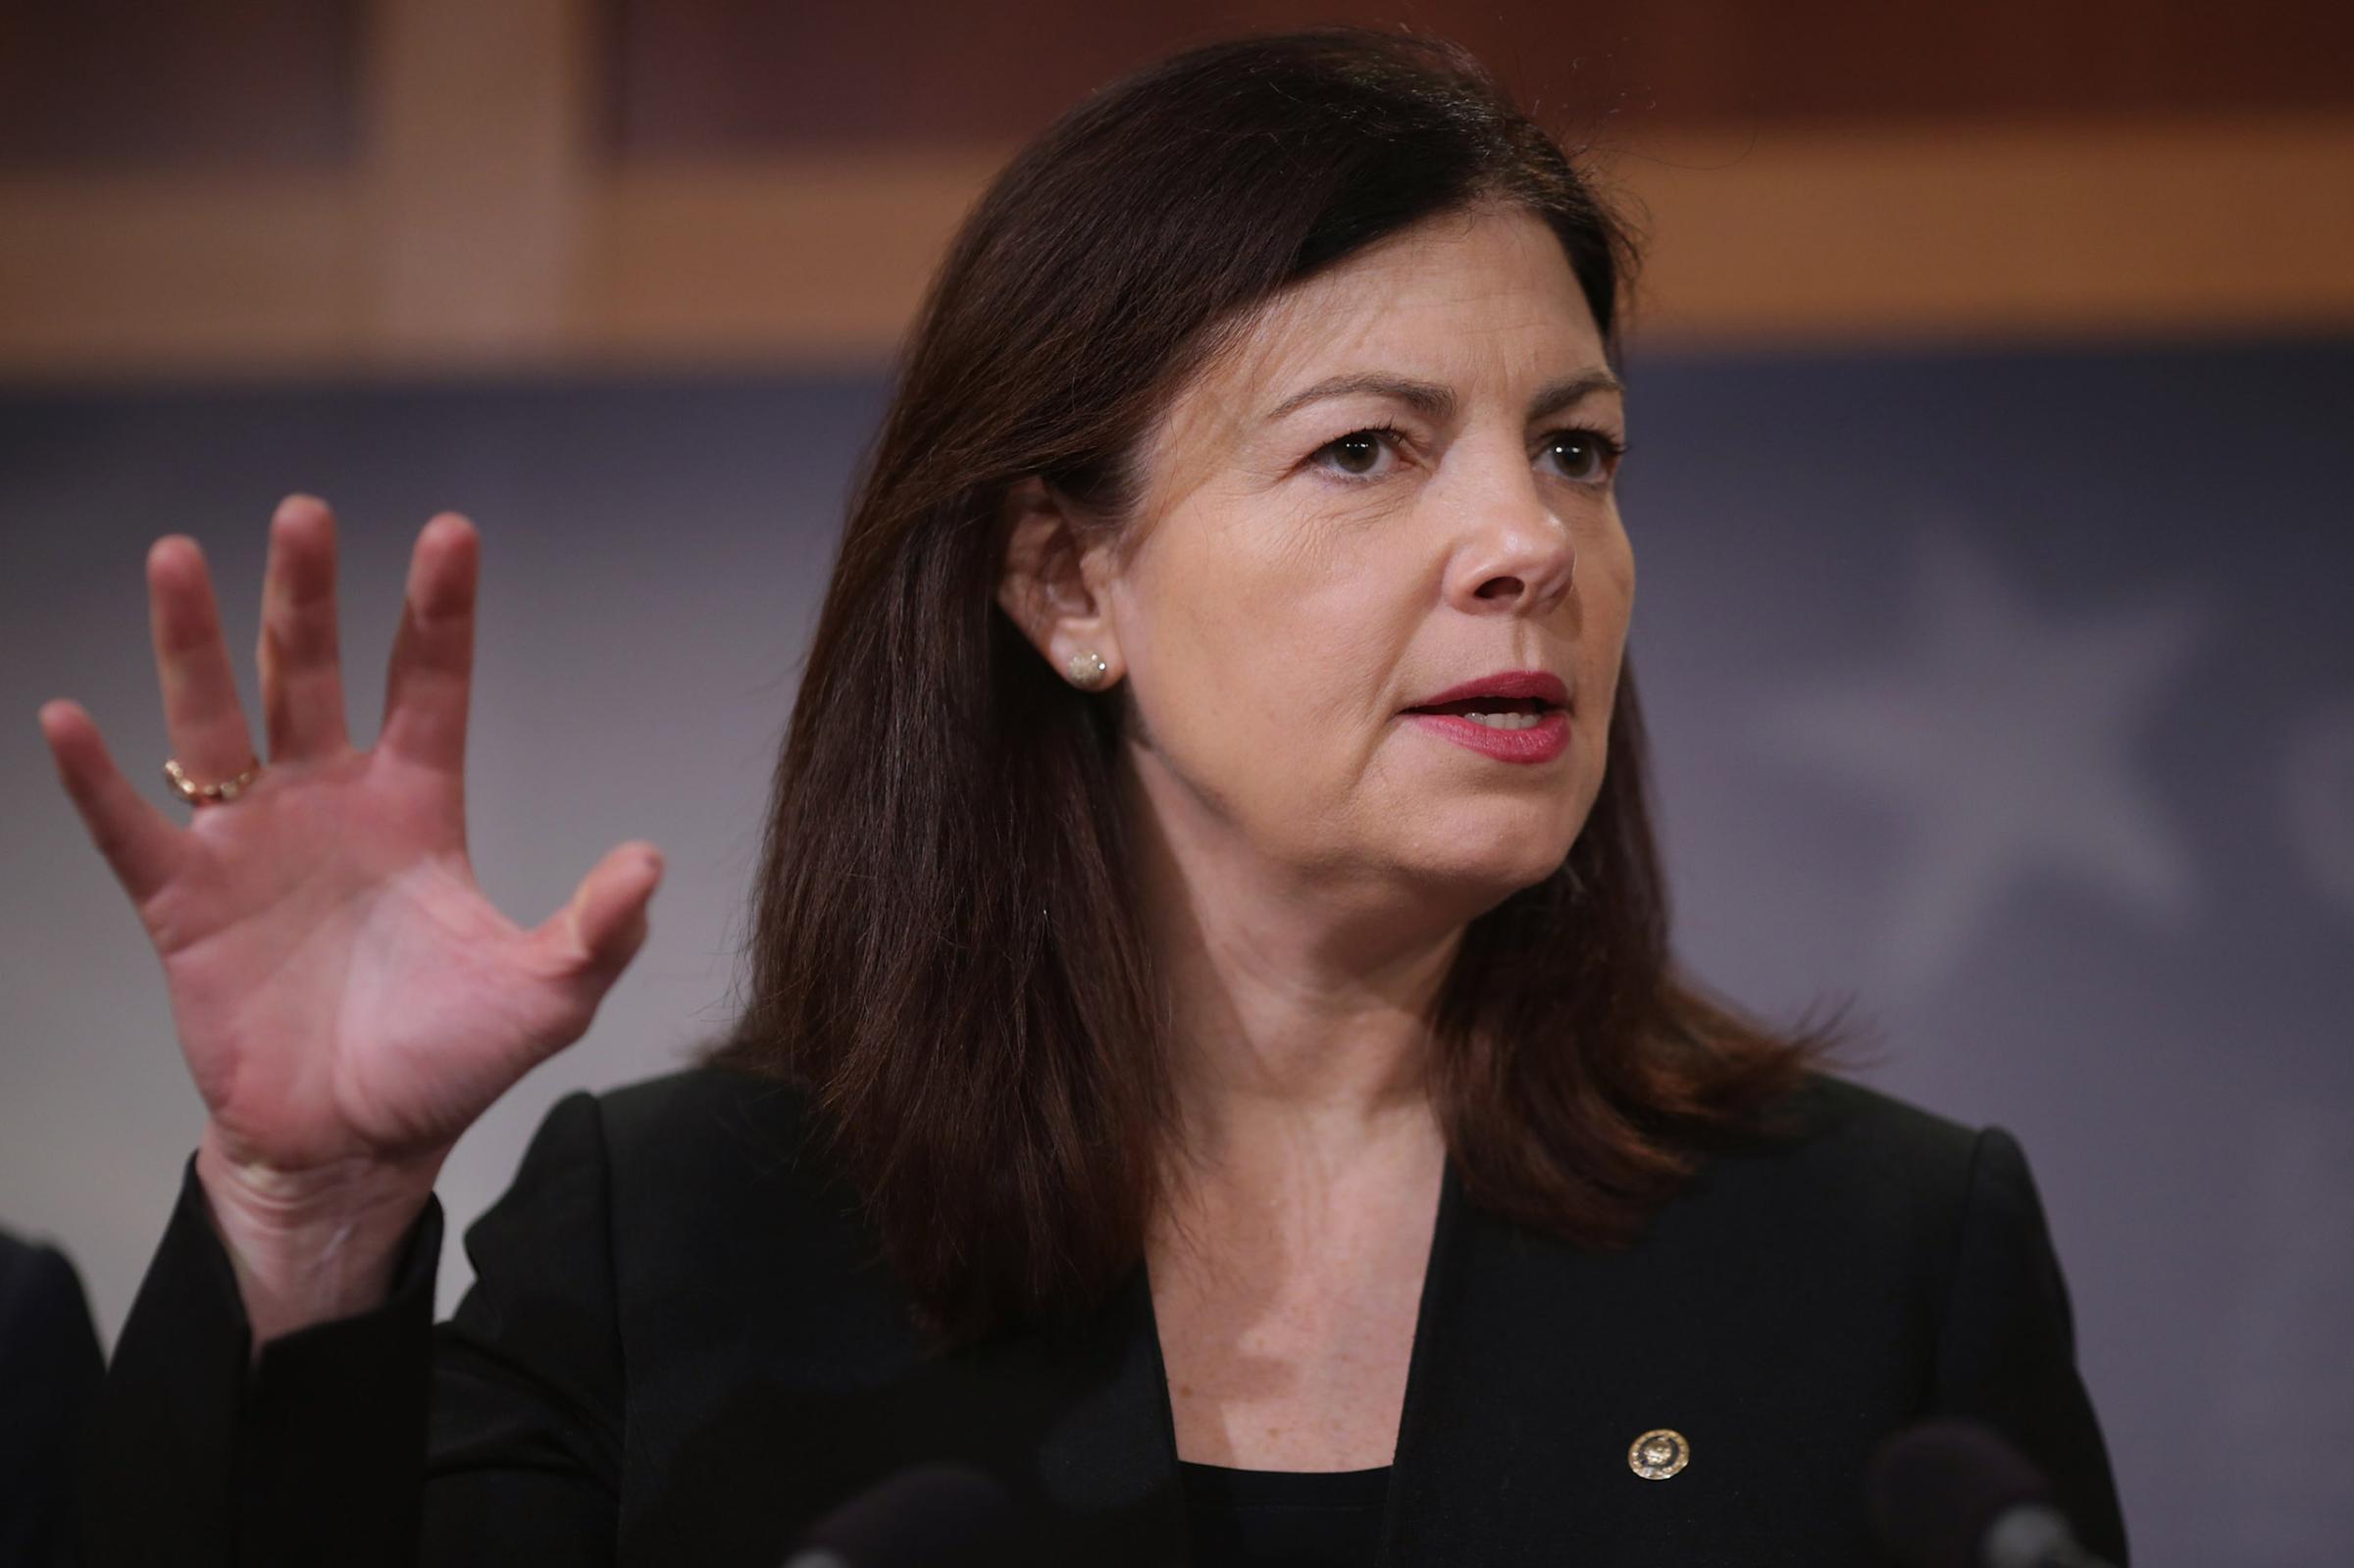 Kelly Ayotte speaks at a news conference at the U.S. Capitol on Feb. 24, 2016.